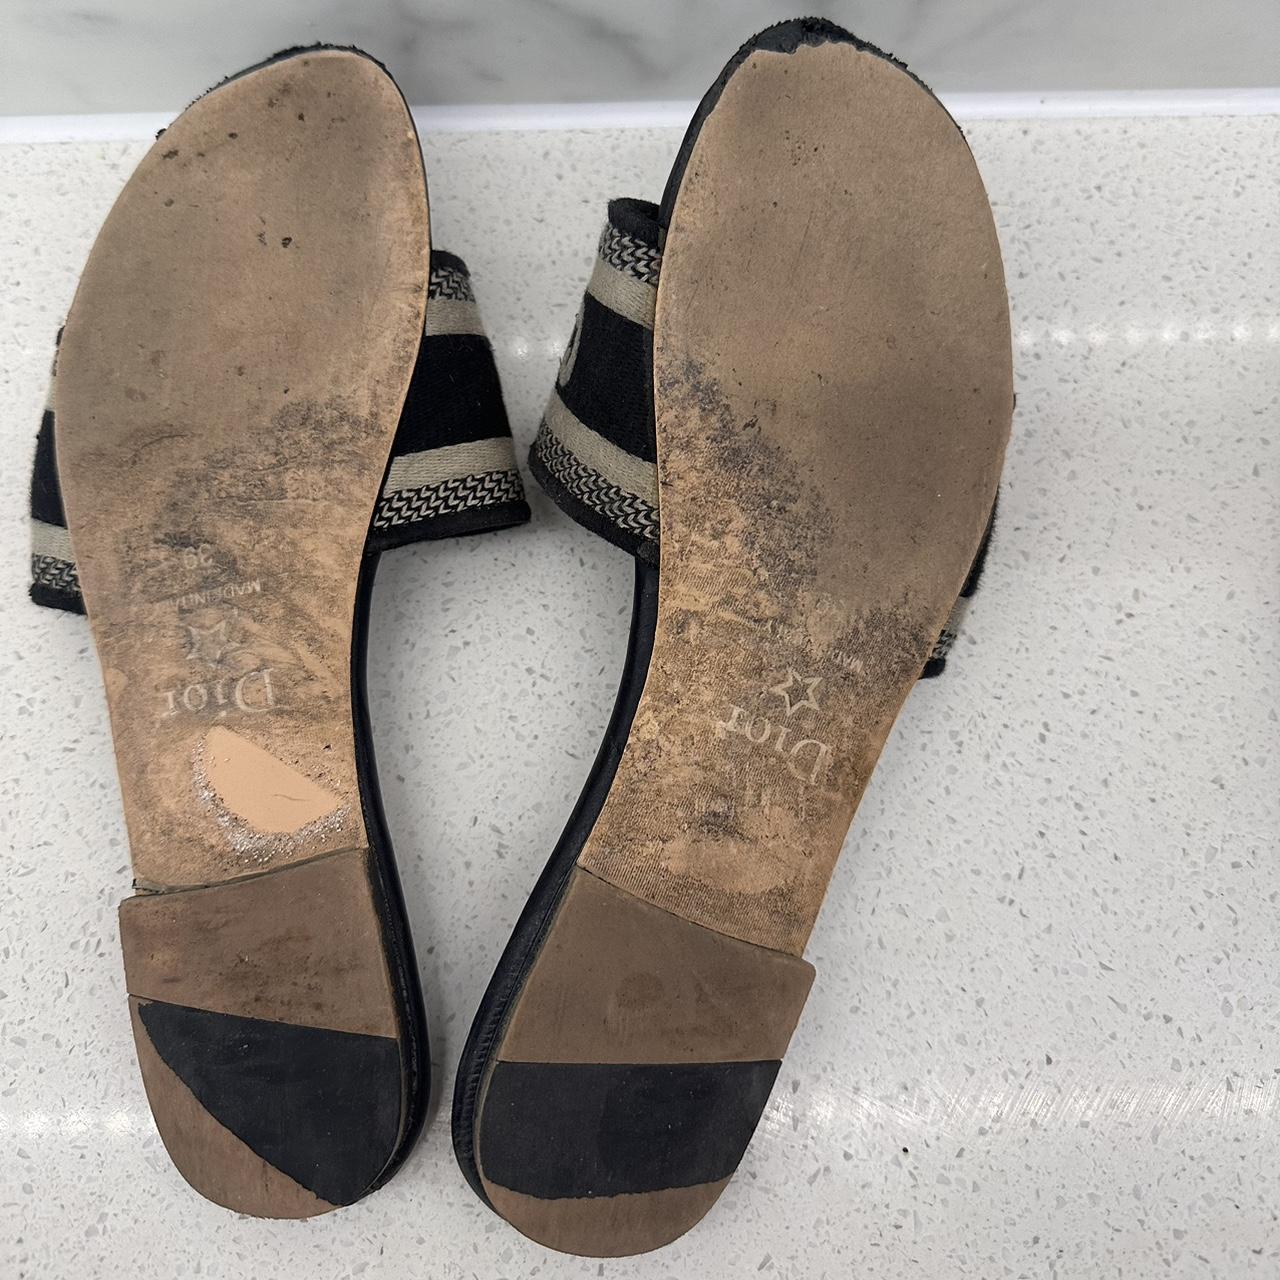 Dior Flats Used condition Please refer to the photos - Depop